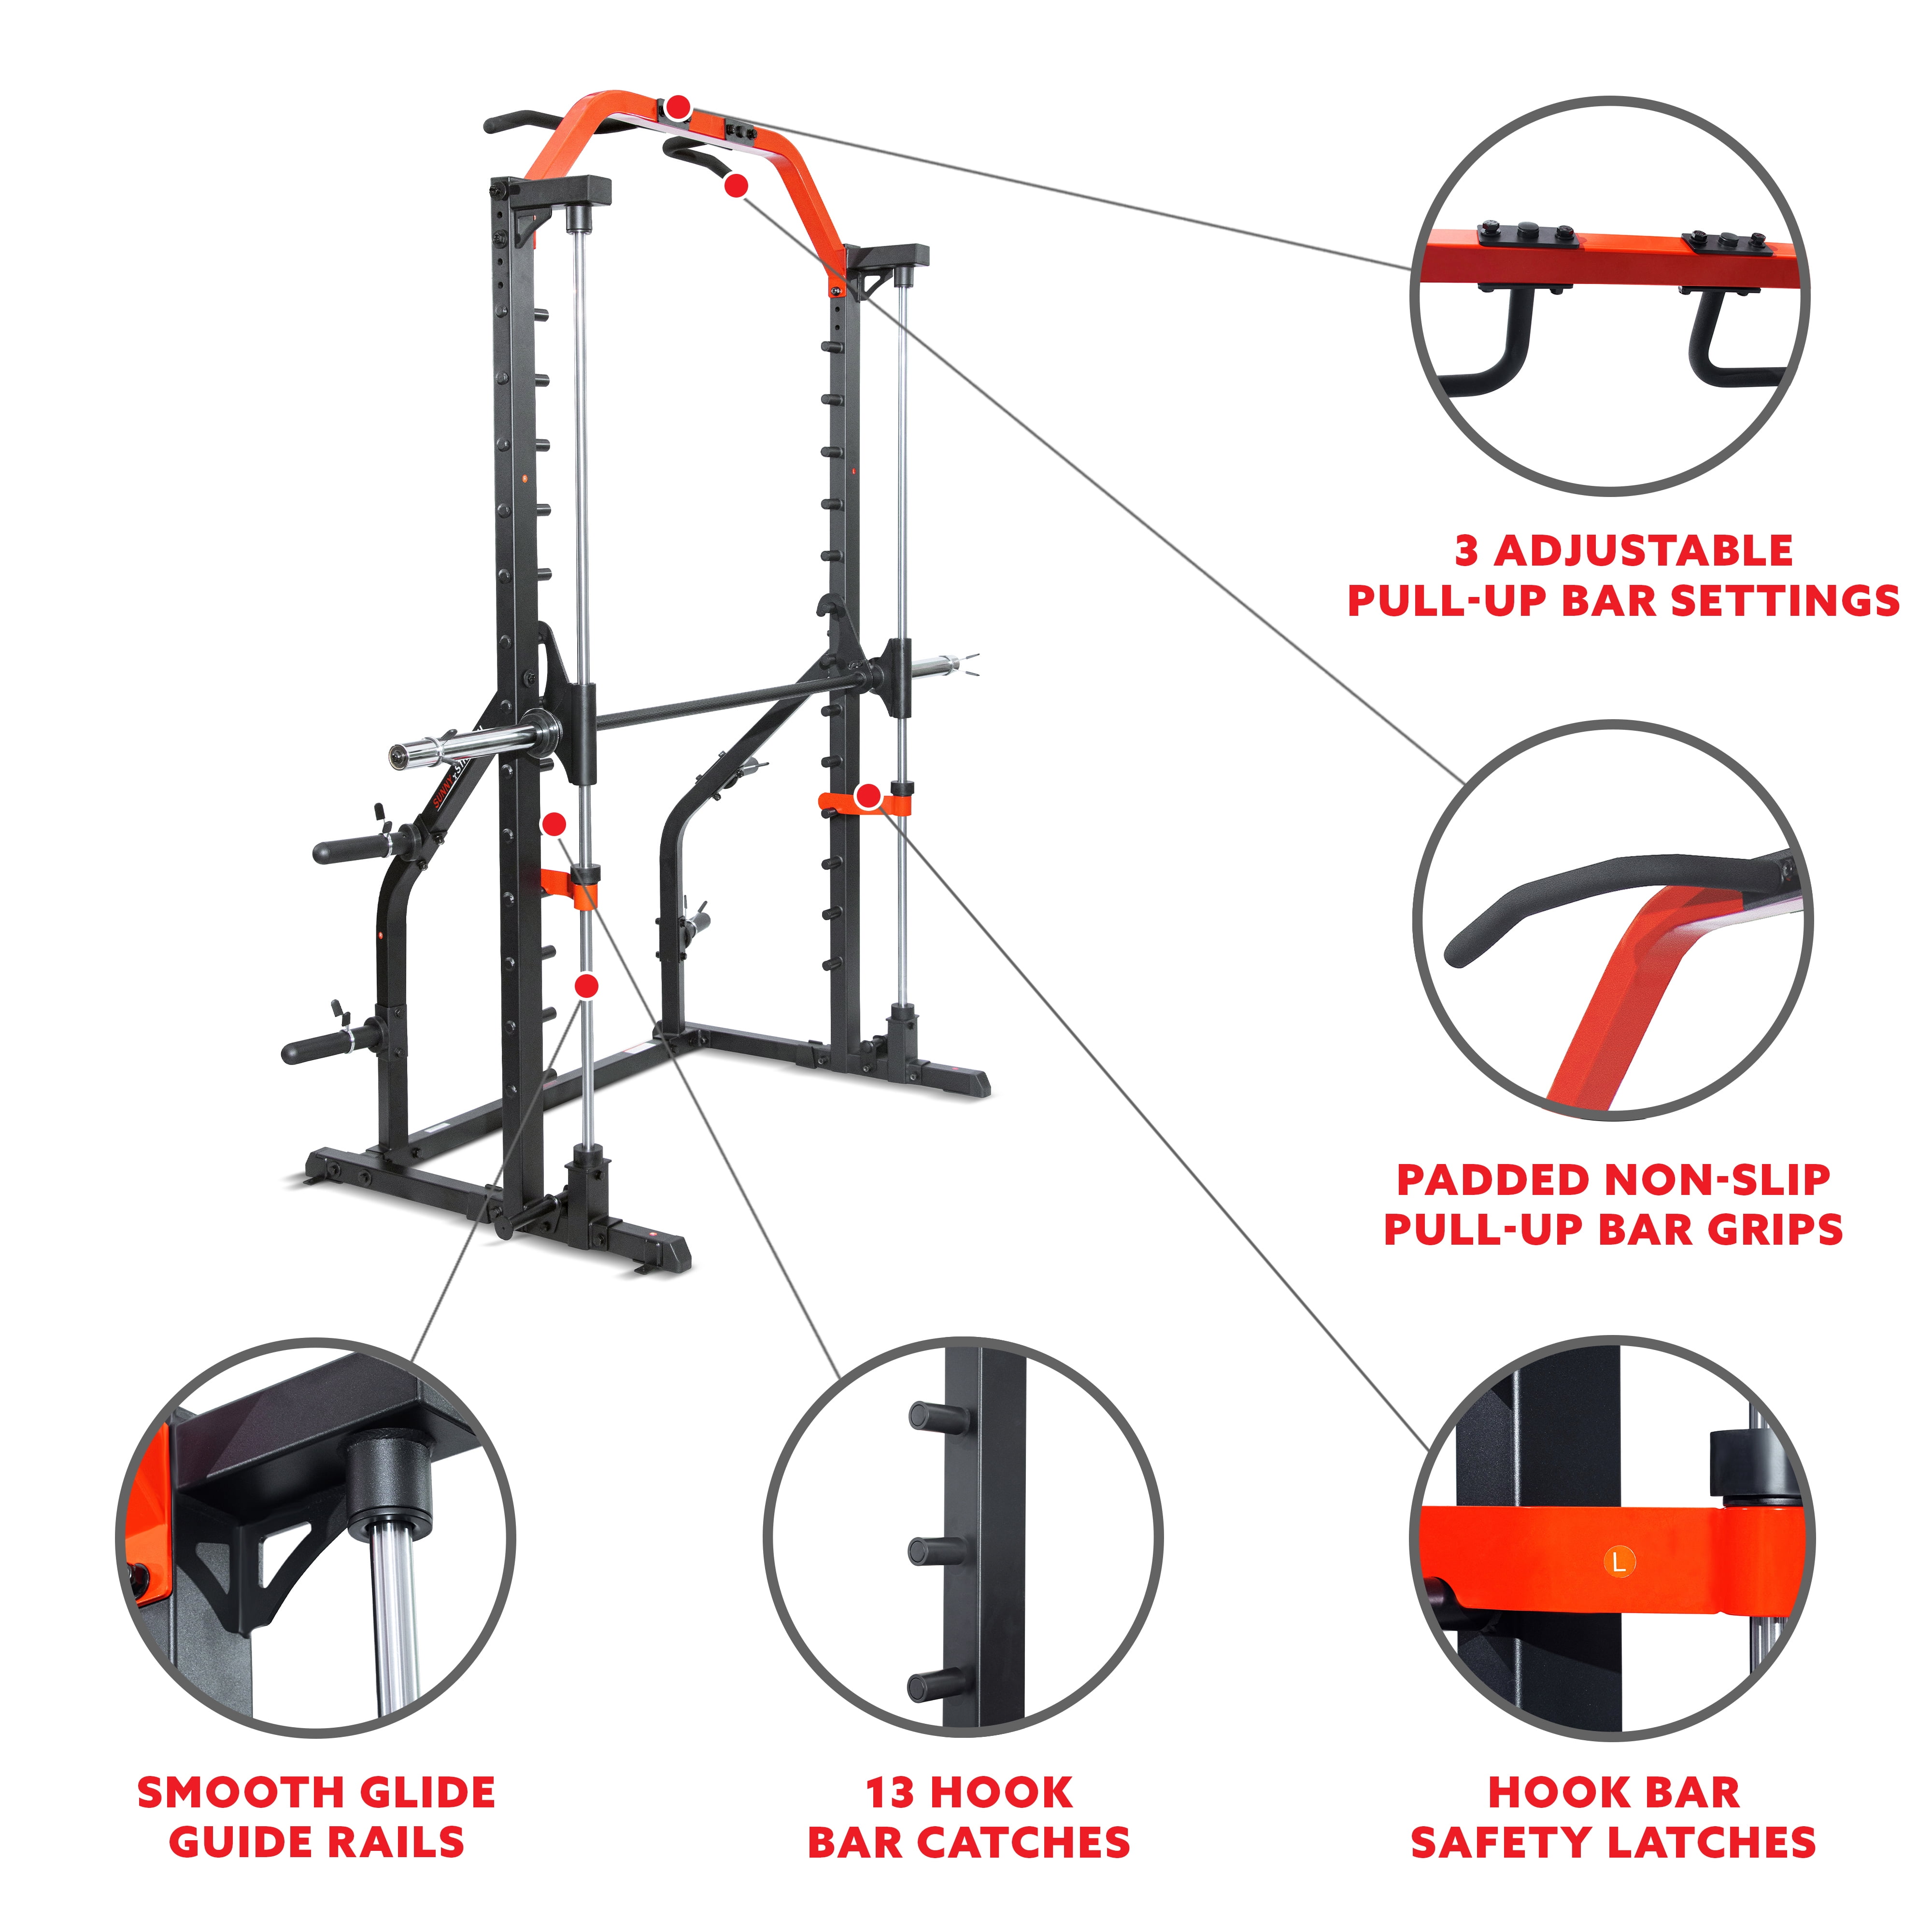 Sunny Health & Fitness Premium Pull with Squat Multifunction – Machine Rack 3 1 SF-XF920021 Bar for in Home Up Power - Gym Smith Adjustable